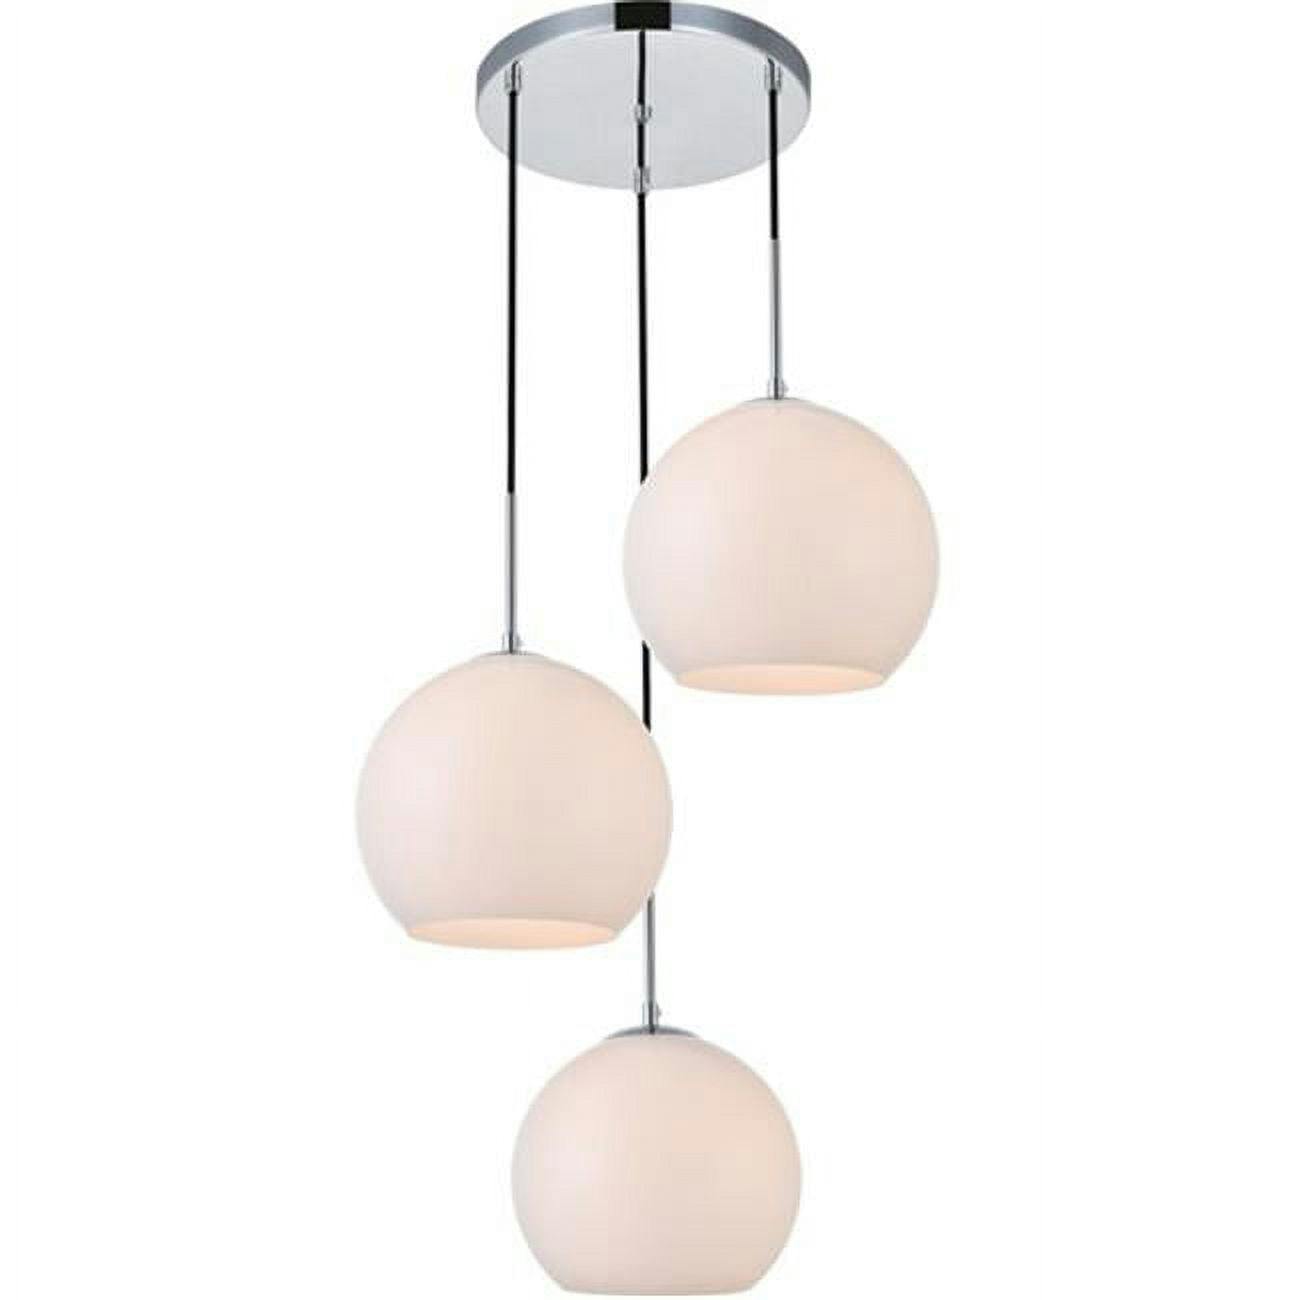 Cosmopolitan Chrome 20" Modern Pendant Light with Frosted White Glass